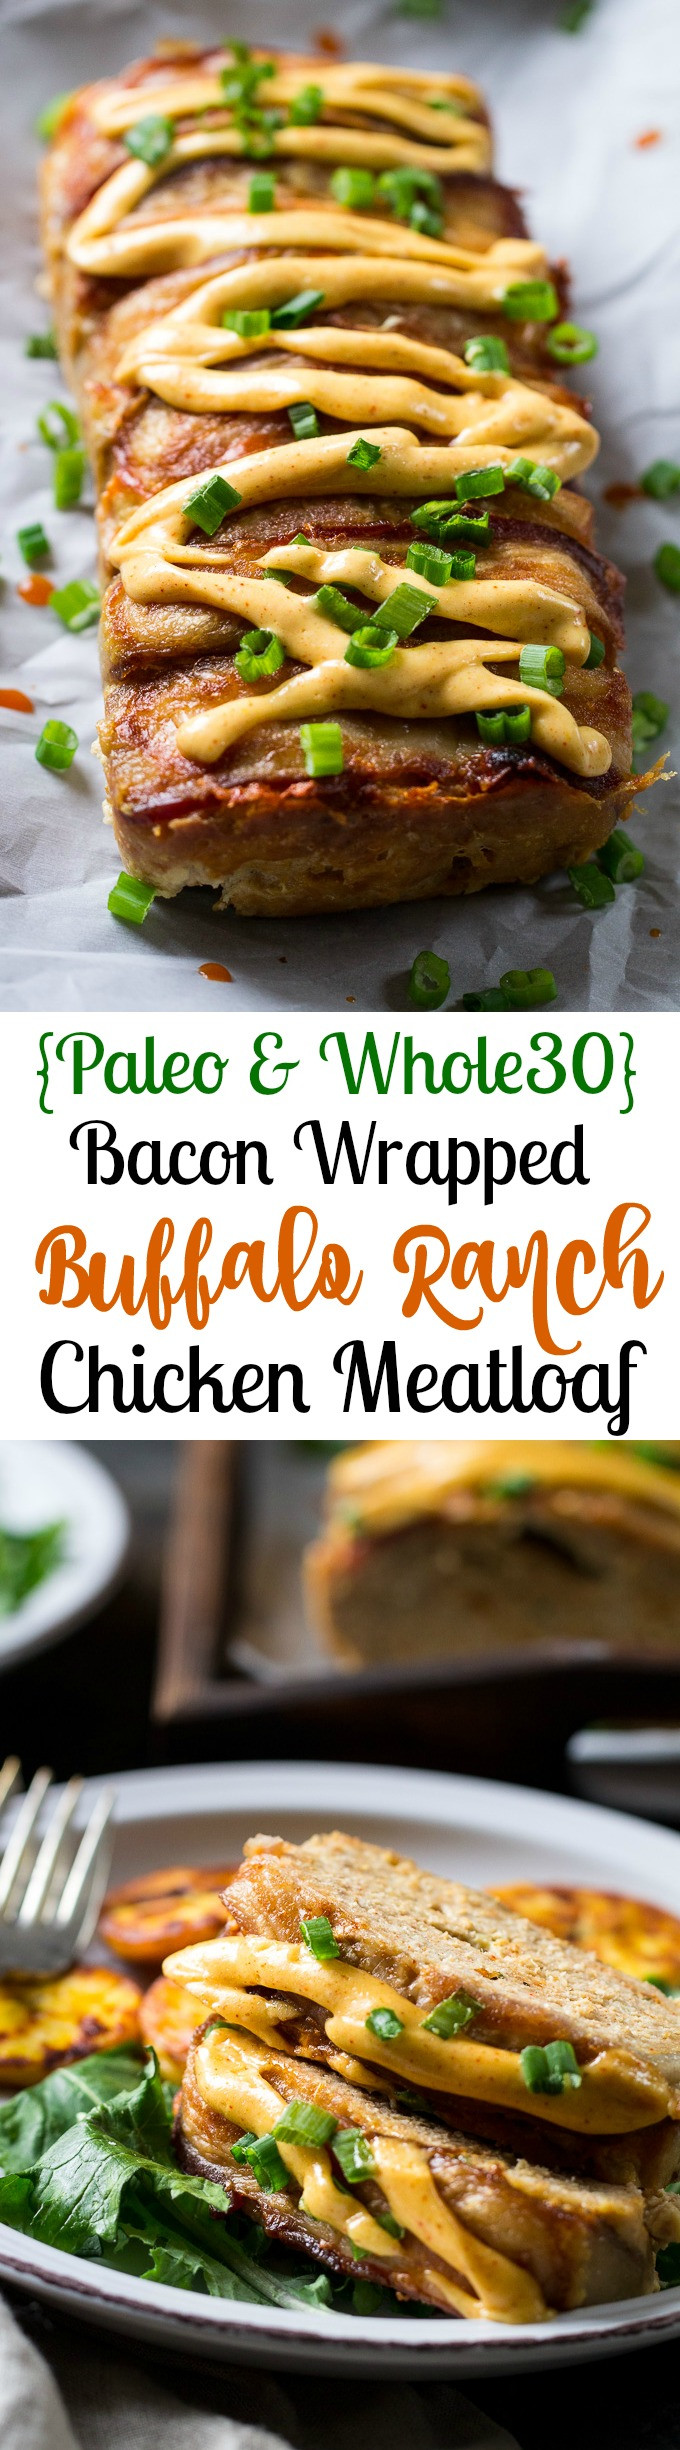 Chicken Meatloaf Paleo
 Bacon Wrapped Buffalo Ranch Chicken Meatloaf Paleo & Whole30